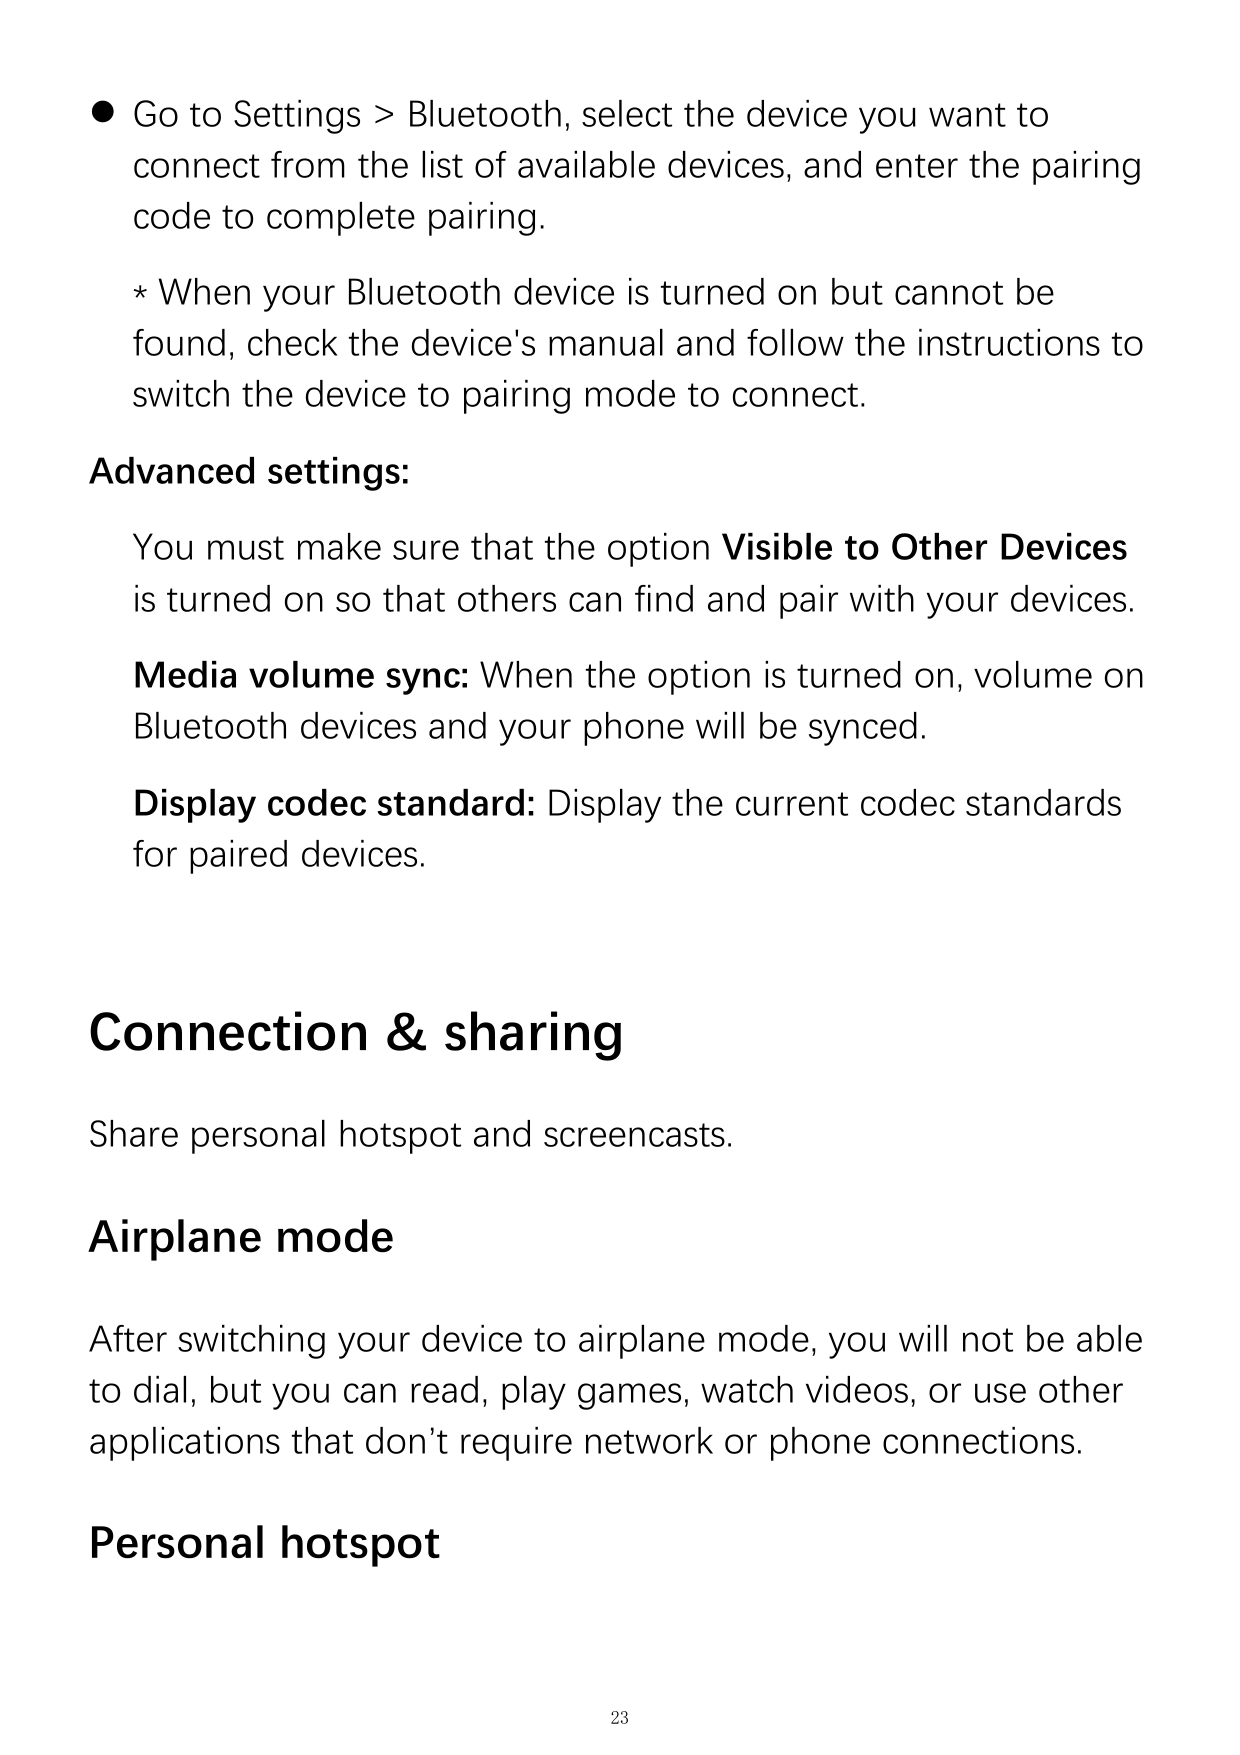  Go to Settings > Bluetooth, select the device you want toconnect from the list of available devices, and enter the pairingcode